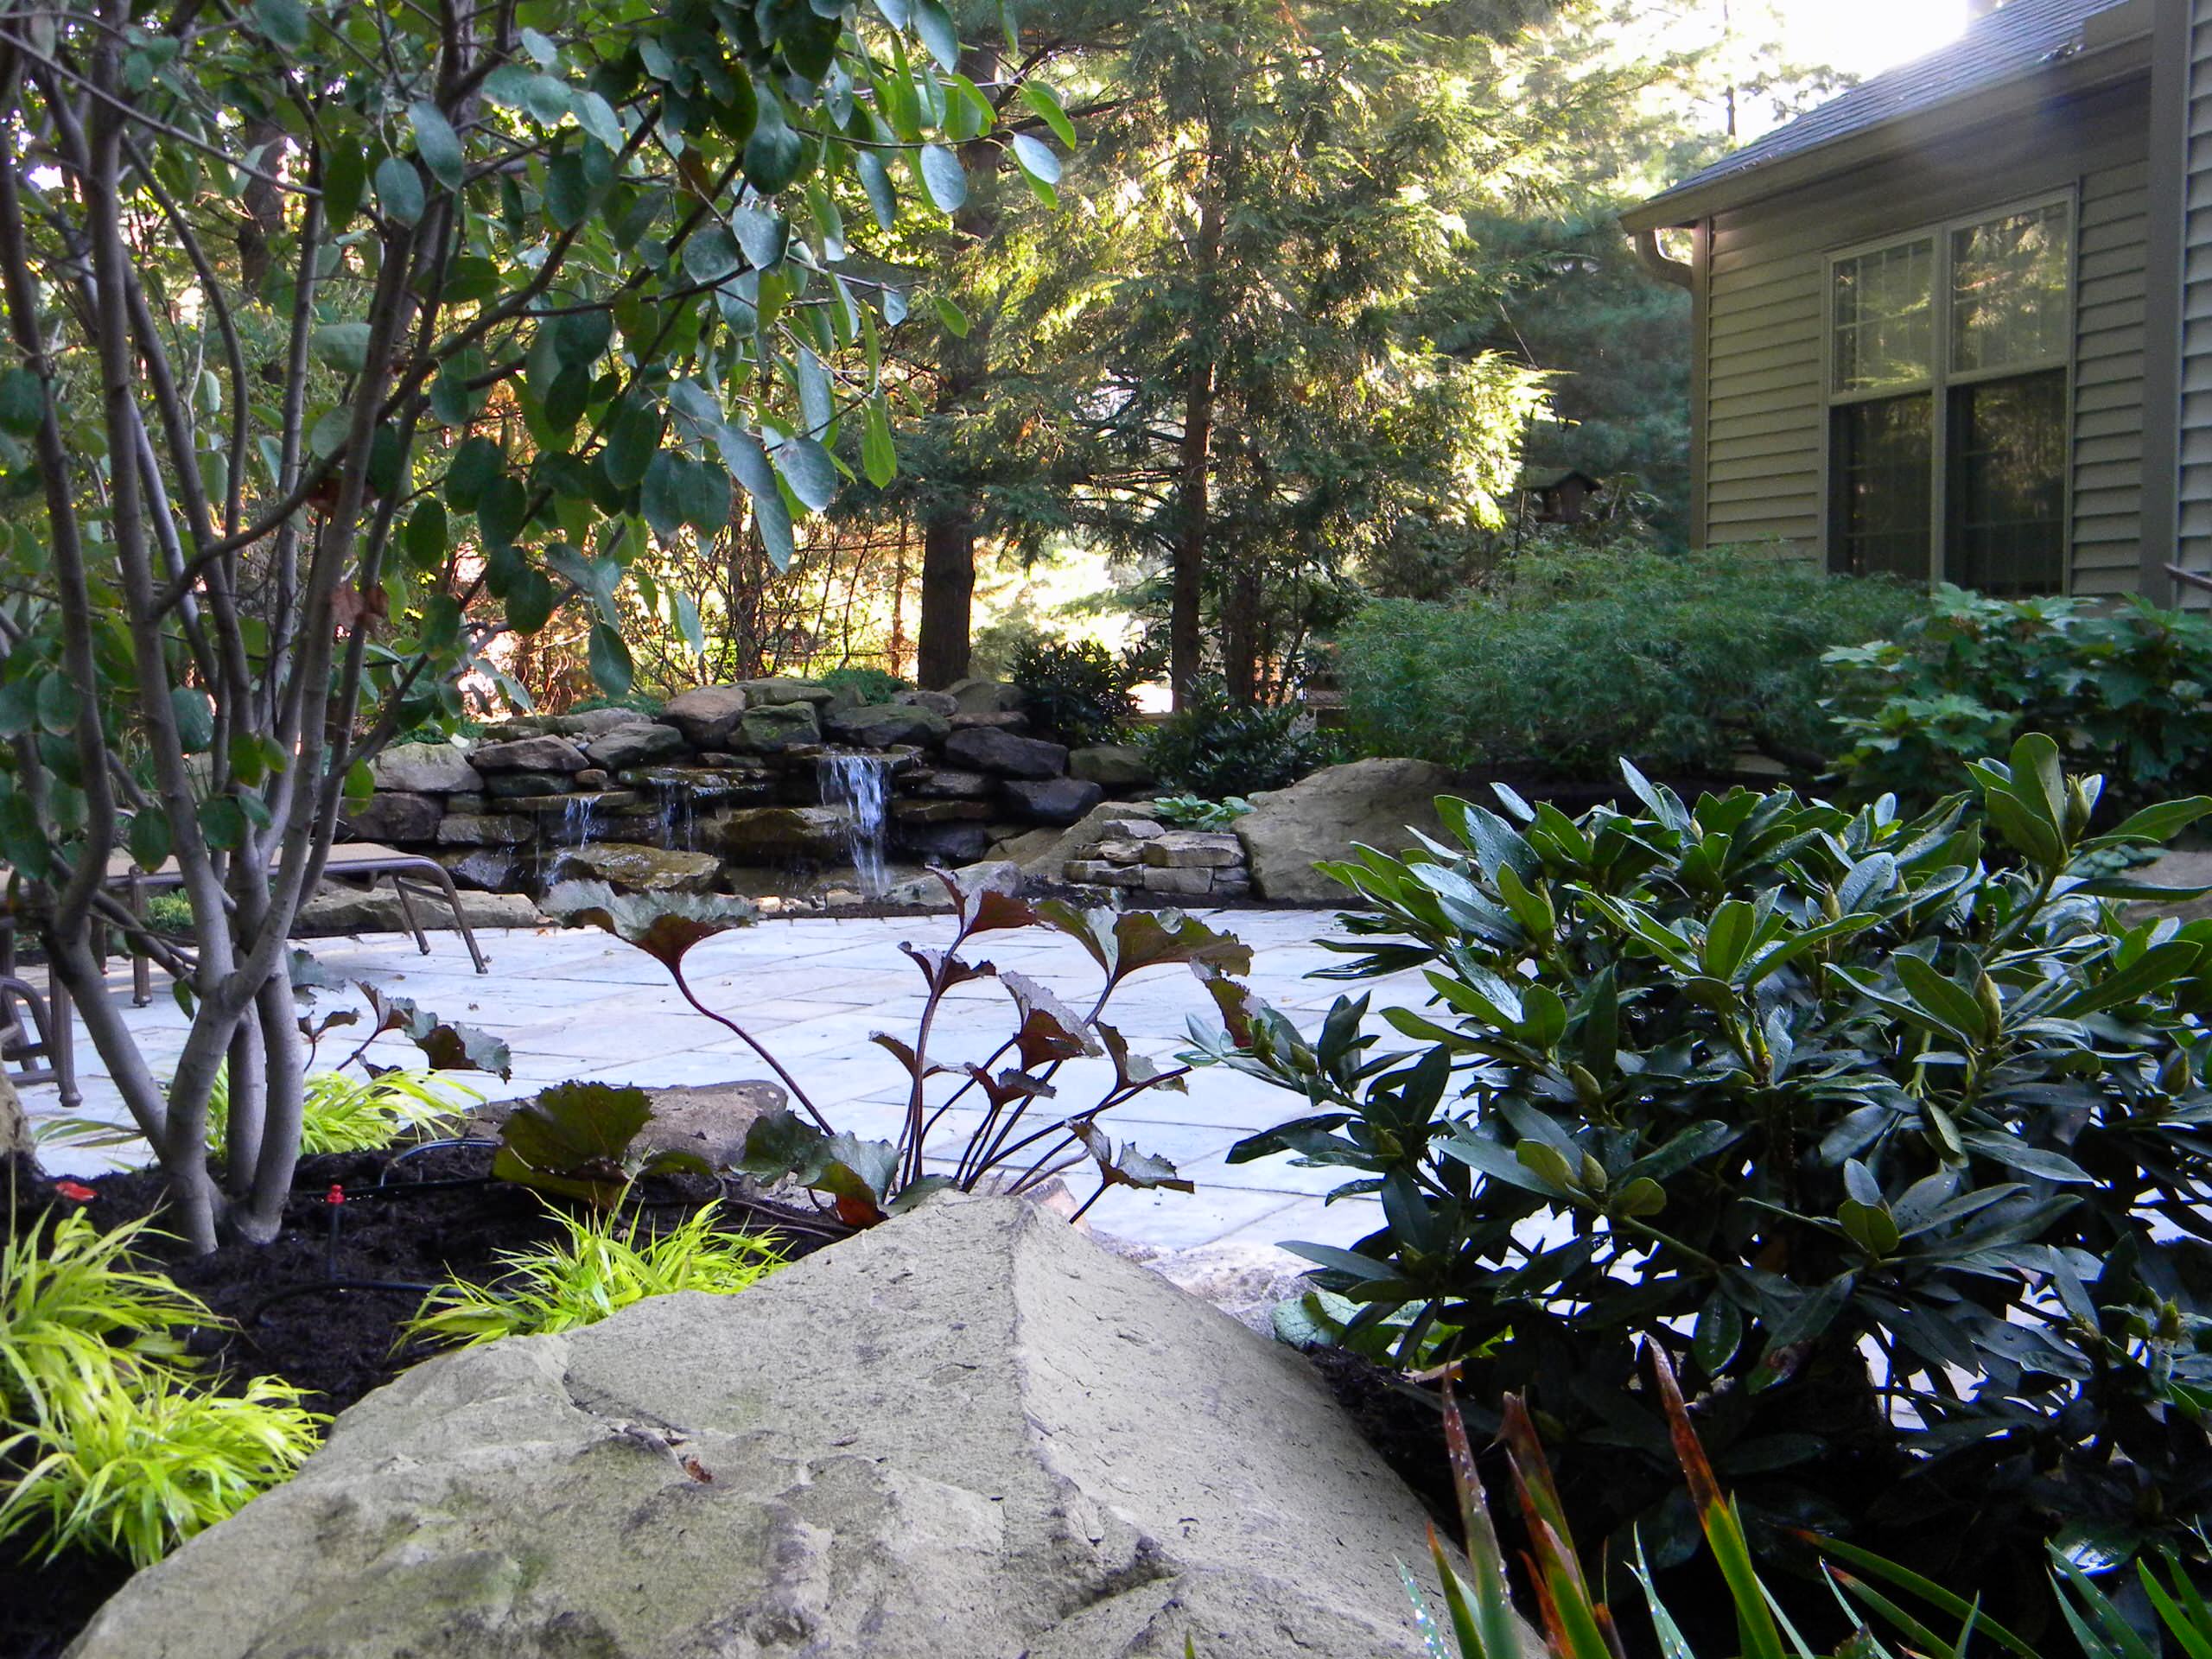 Blue Stone Patio and Waterfall